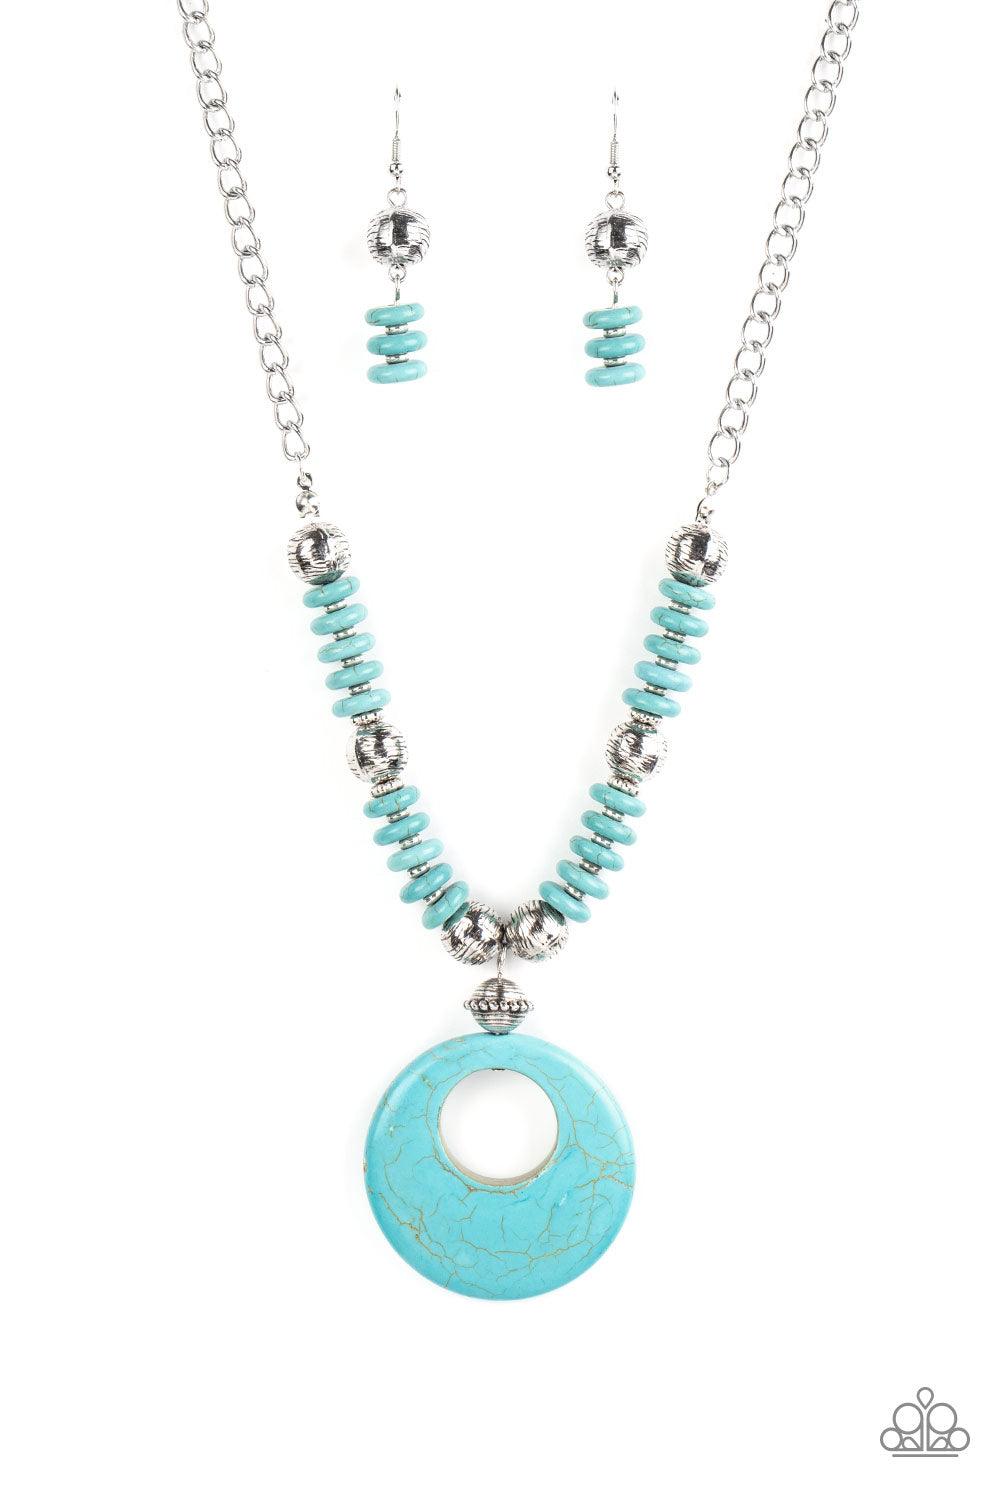 Paparazzi Accessories Oasis Goddess - Blue Infused with dainty silver accents, mismatched silver beads and turquoise stone discs are threaded along an invisible wire below the collar. An oversized turquoise stone pendant swings from the center of the eart